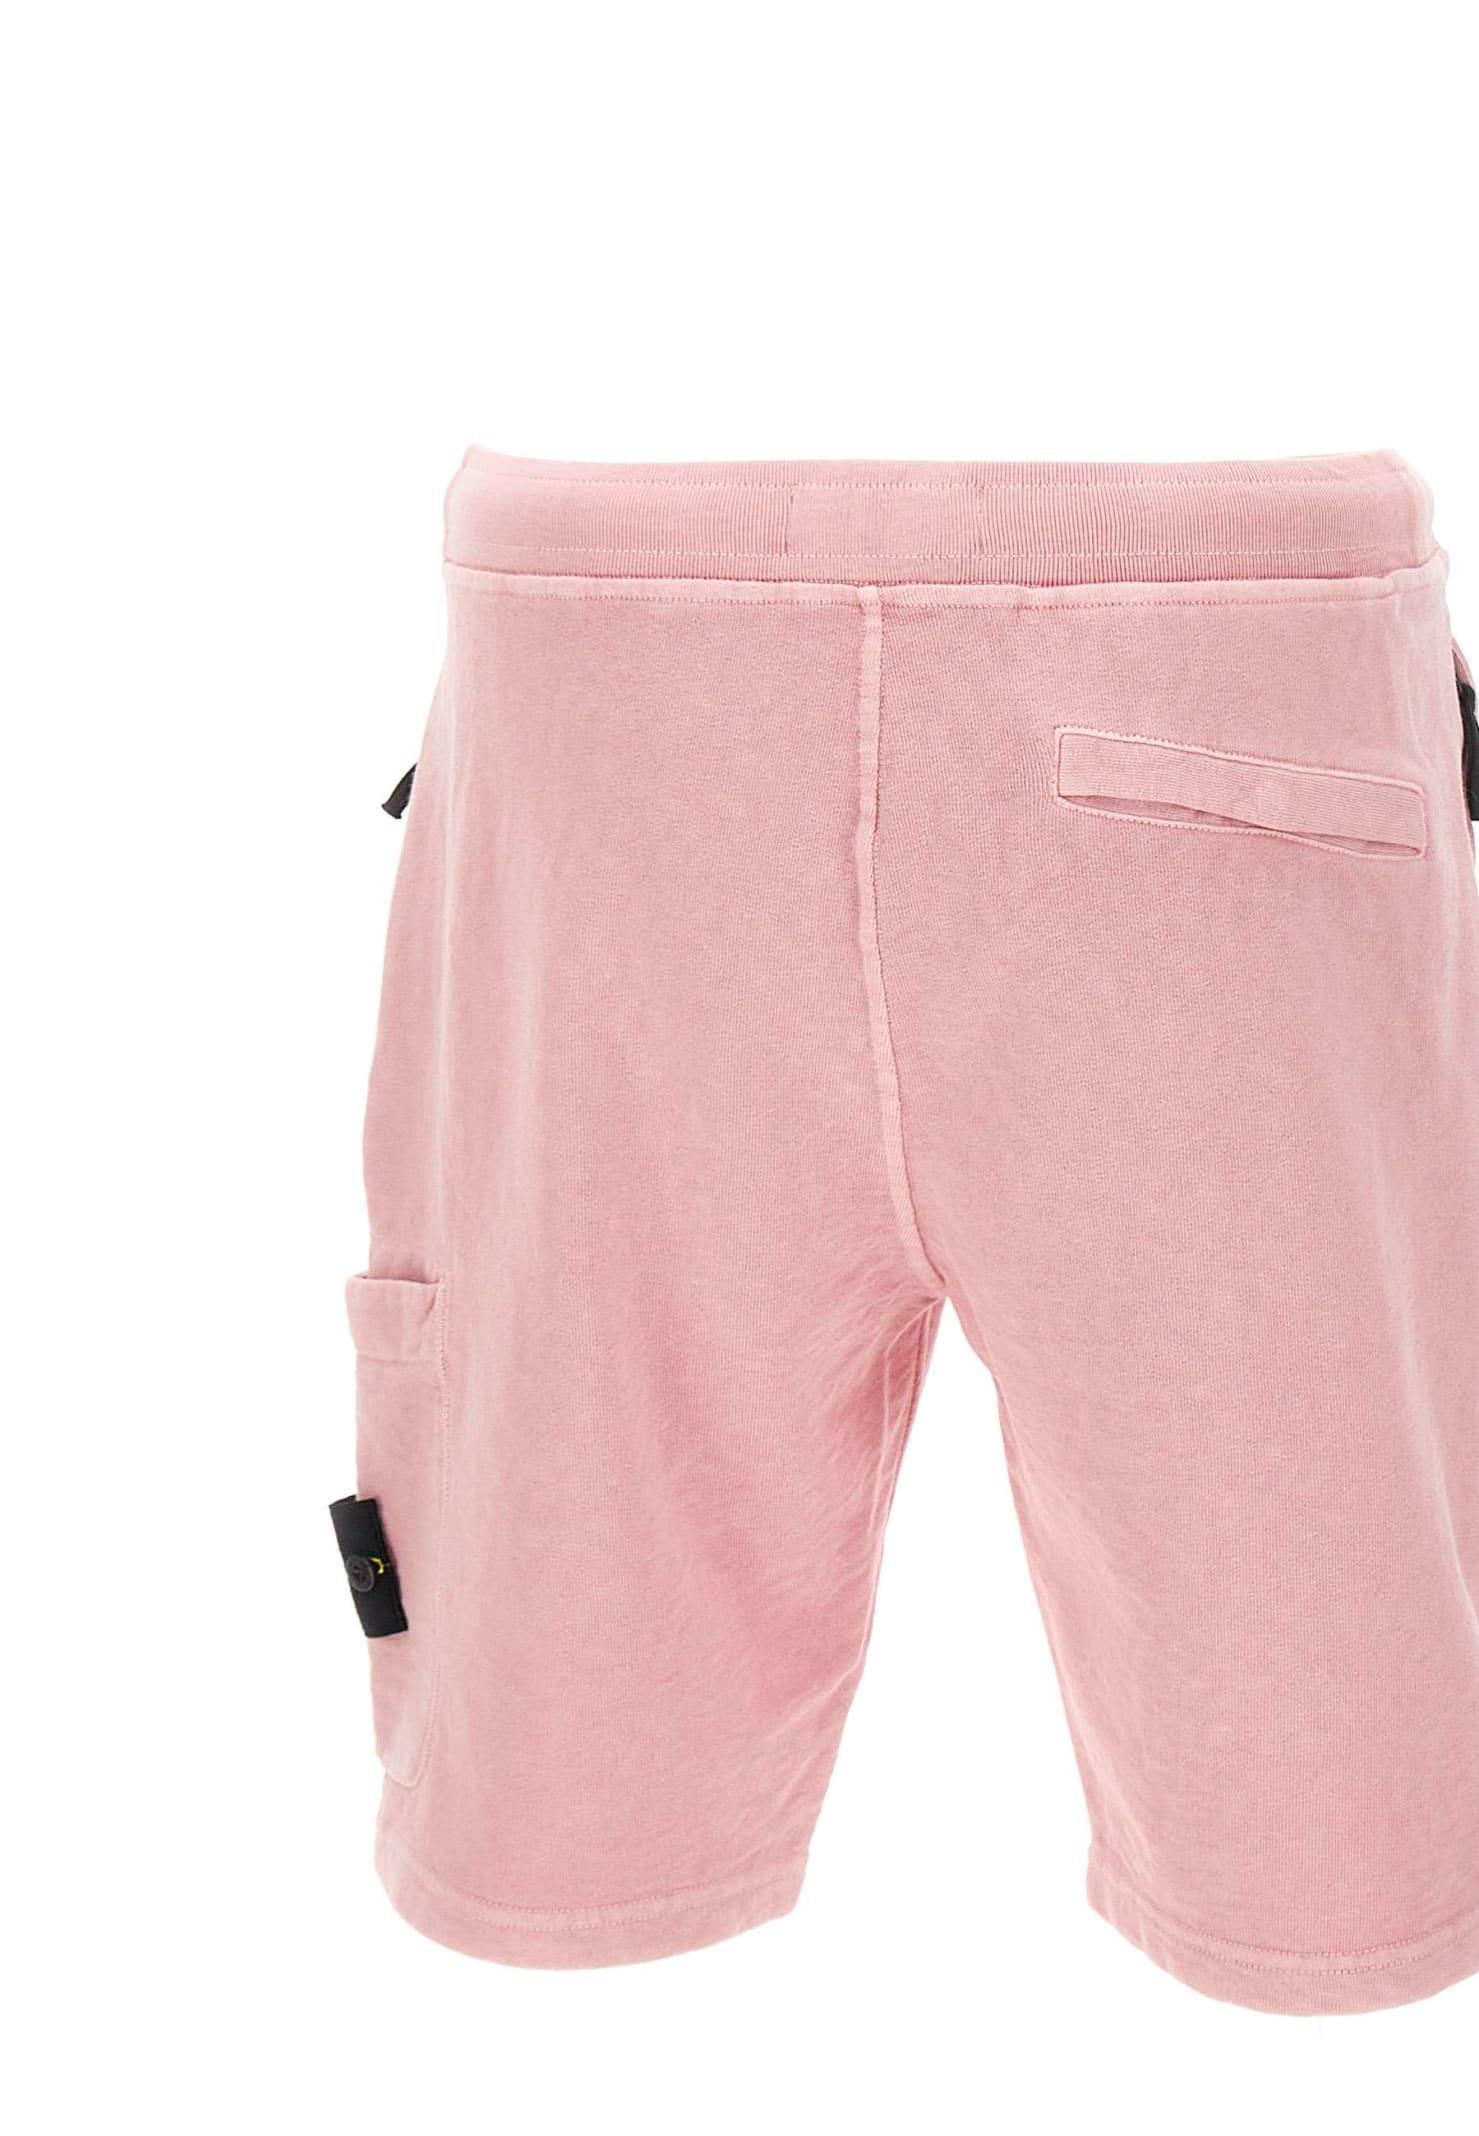 Stone Island Cotton Shorts in Pink for Men | Lyst